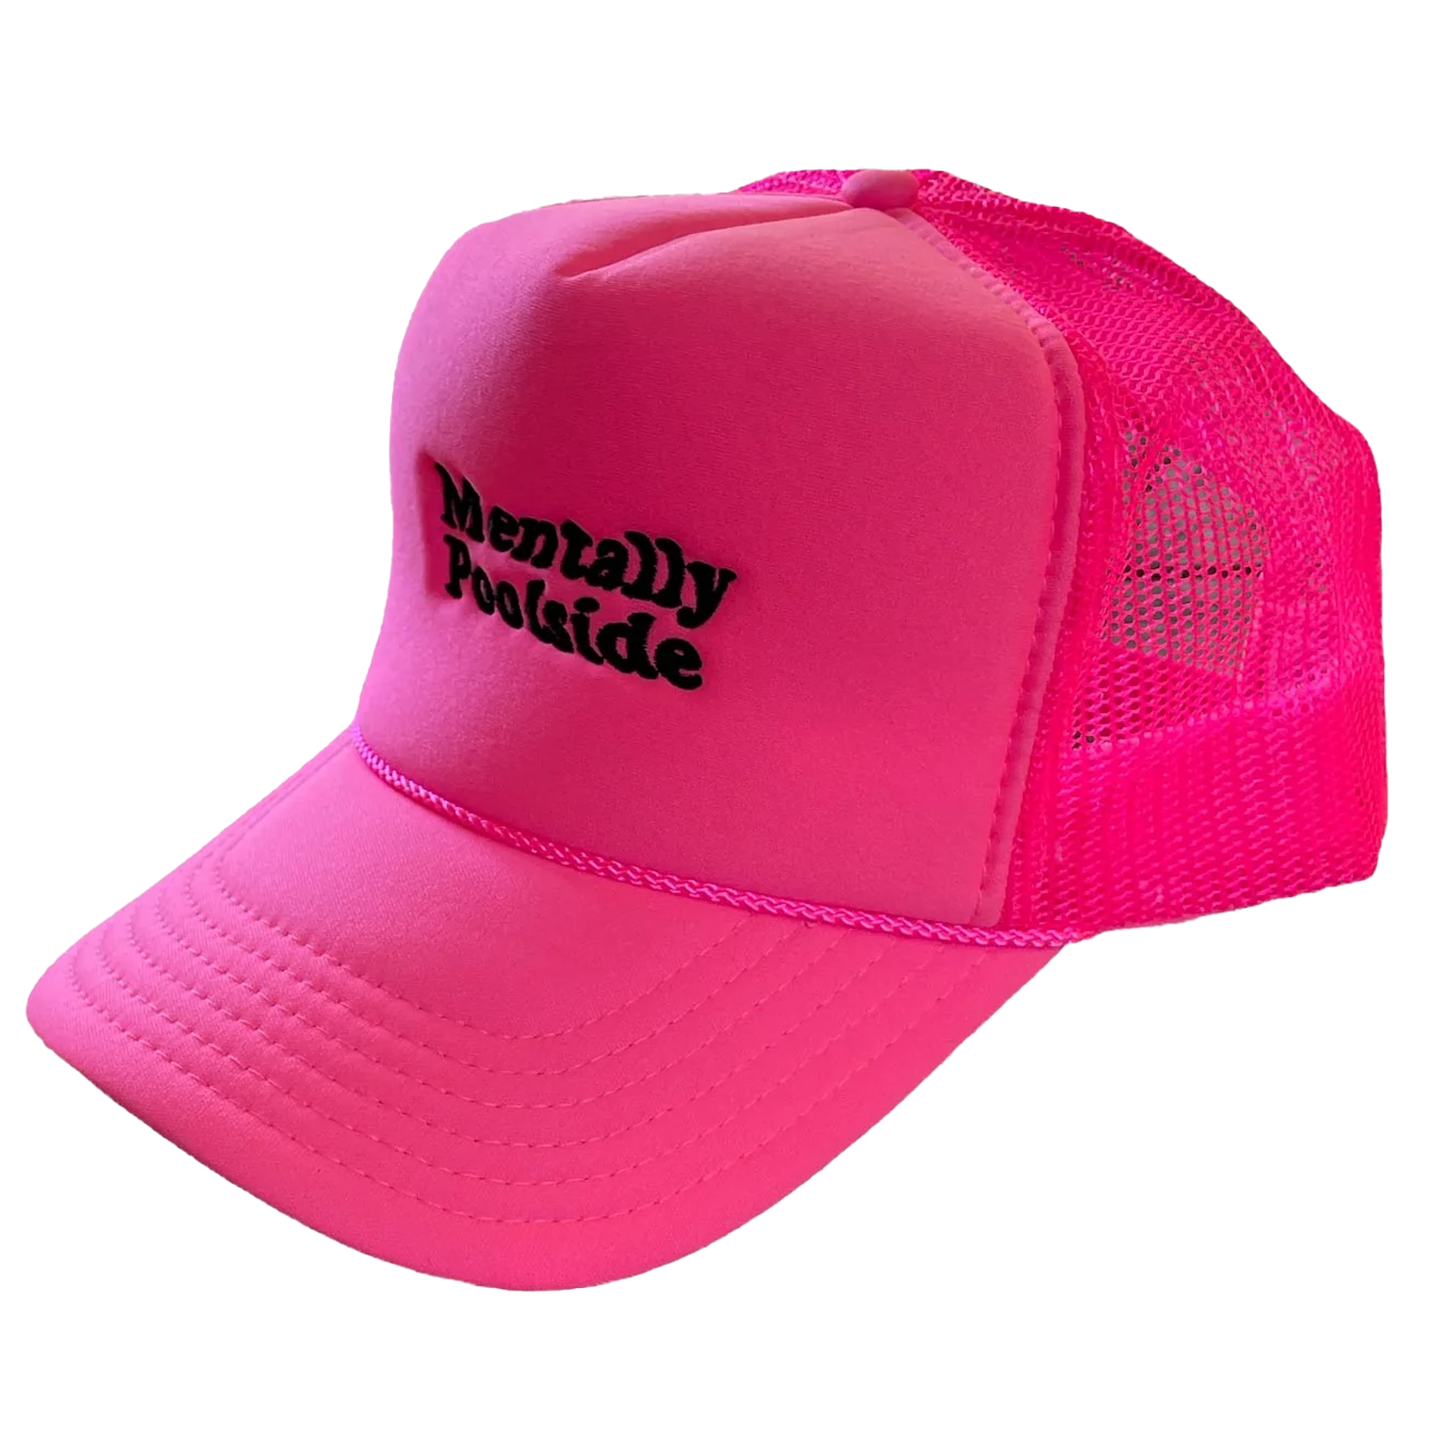 Mentally Poolside Truckers Hat - Pink